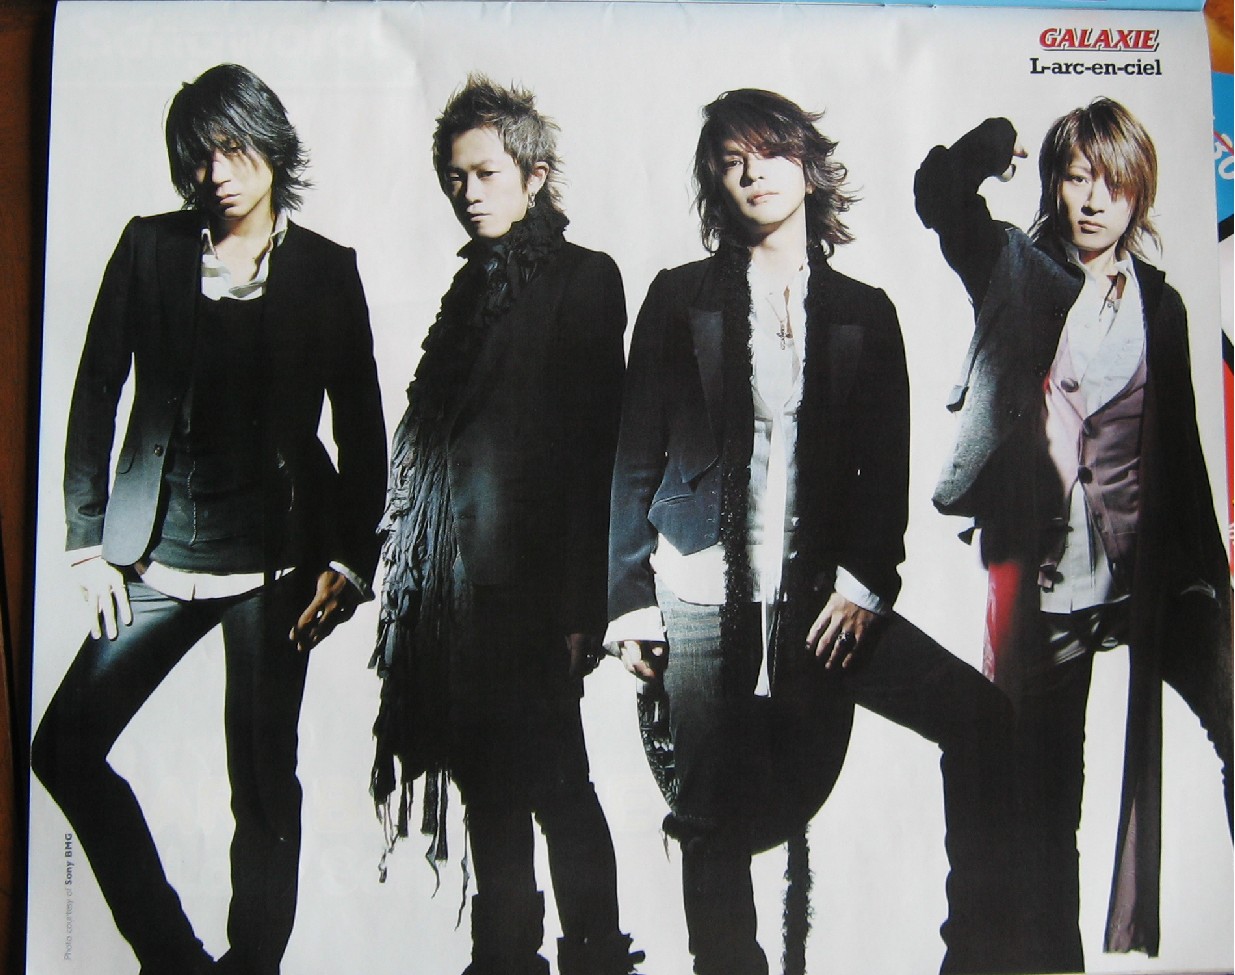 And now there's a poster of L'Arc-en-Ciel in Galaxie magazine~!